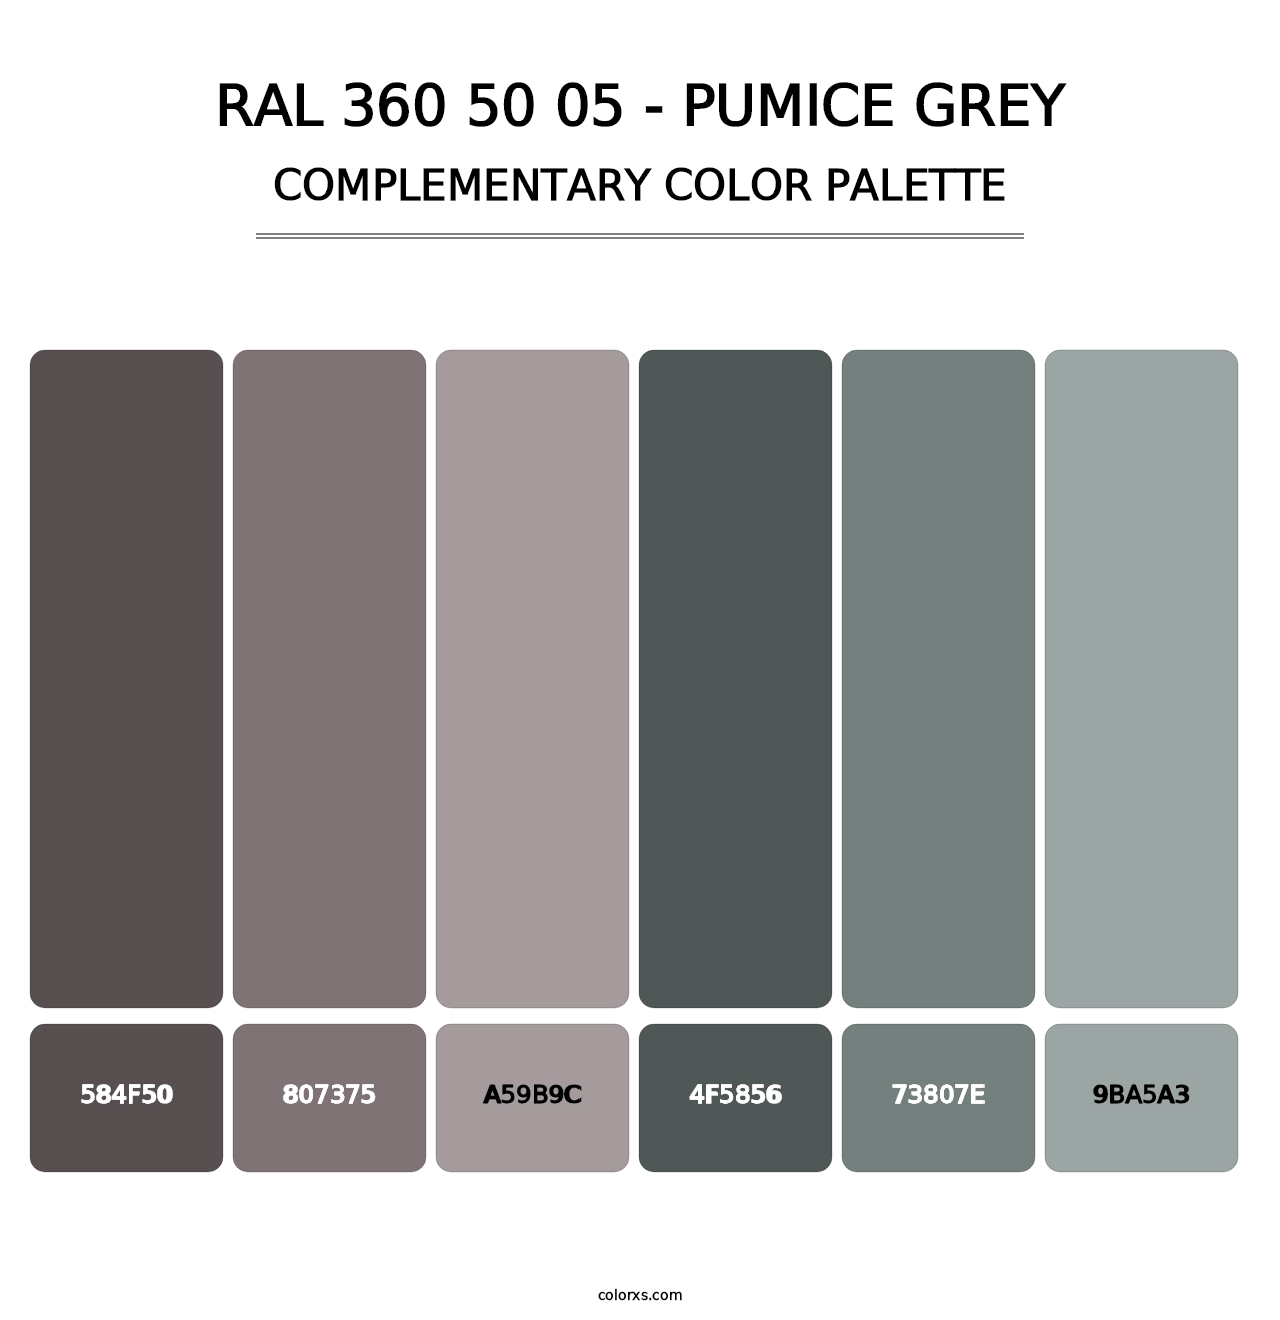 RAL 360 50 05 - Pumice Grey - Complementary Color Palette